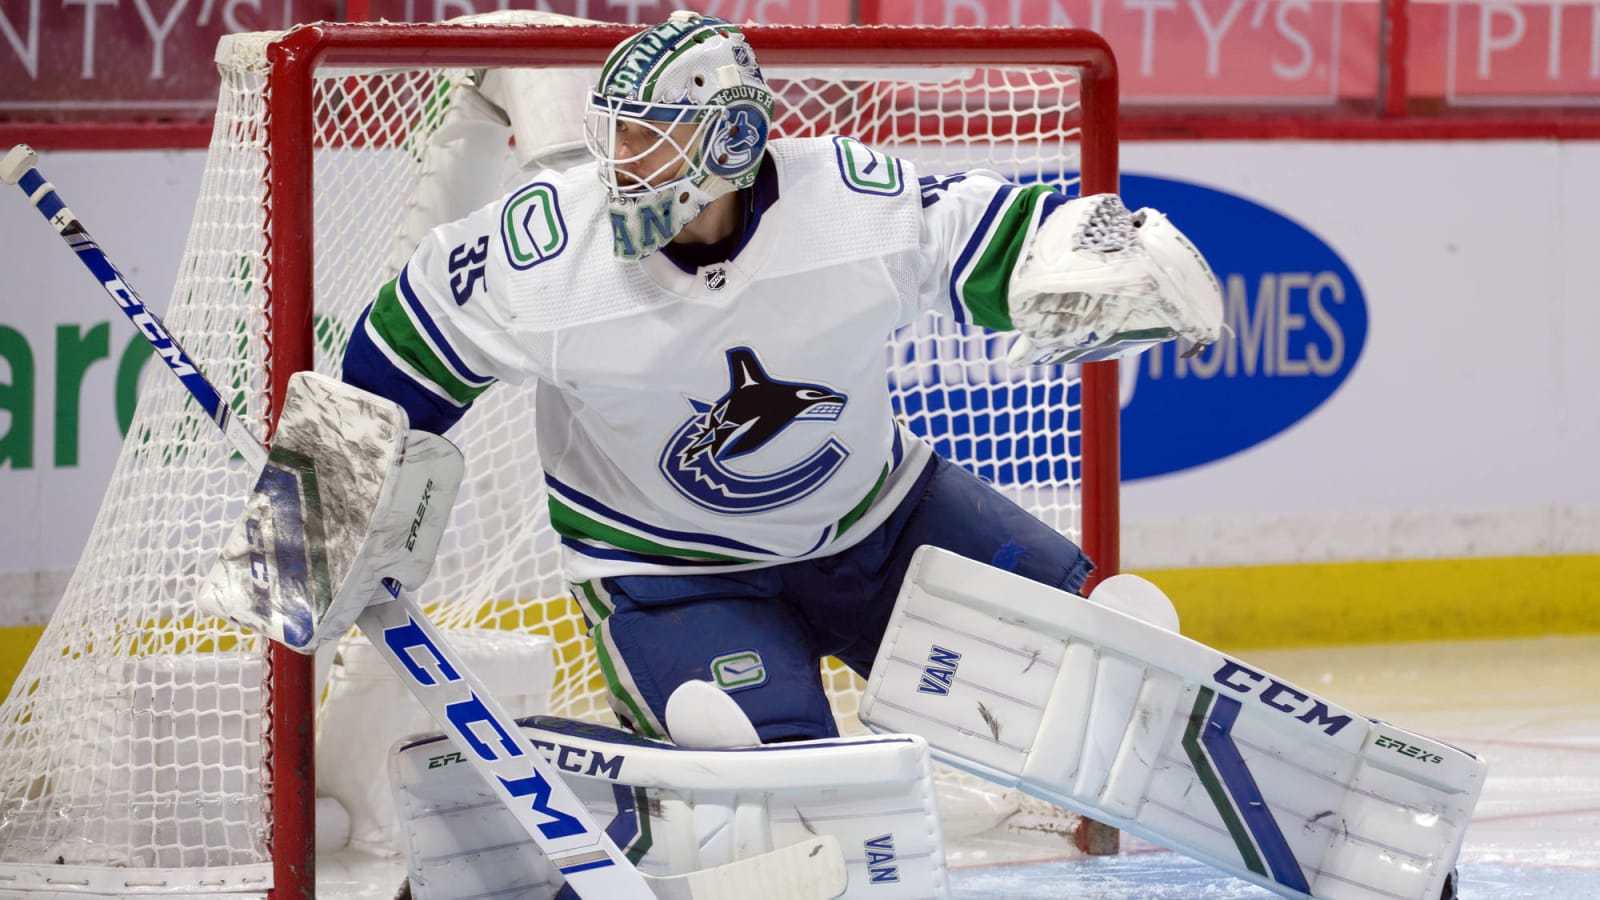 Goalie Demko stands tall with 34 saves as Canucks beat Jets 4-3 in shootout  - North Delta Reporter